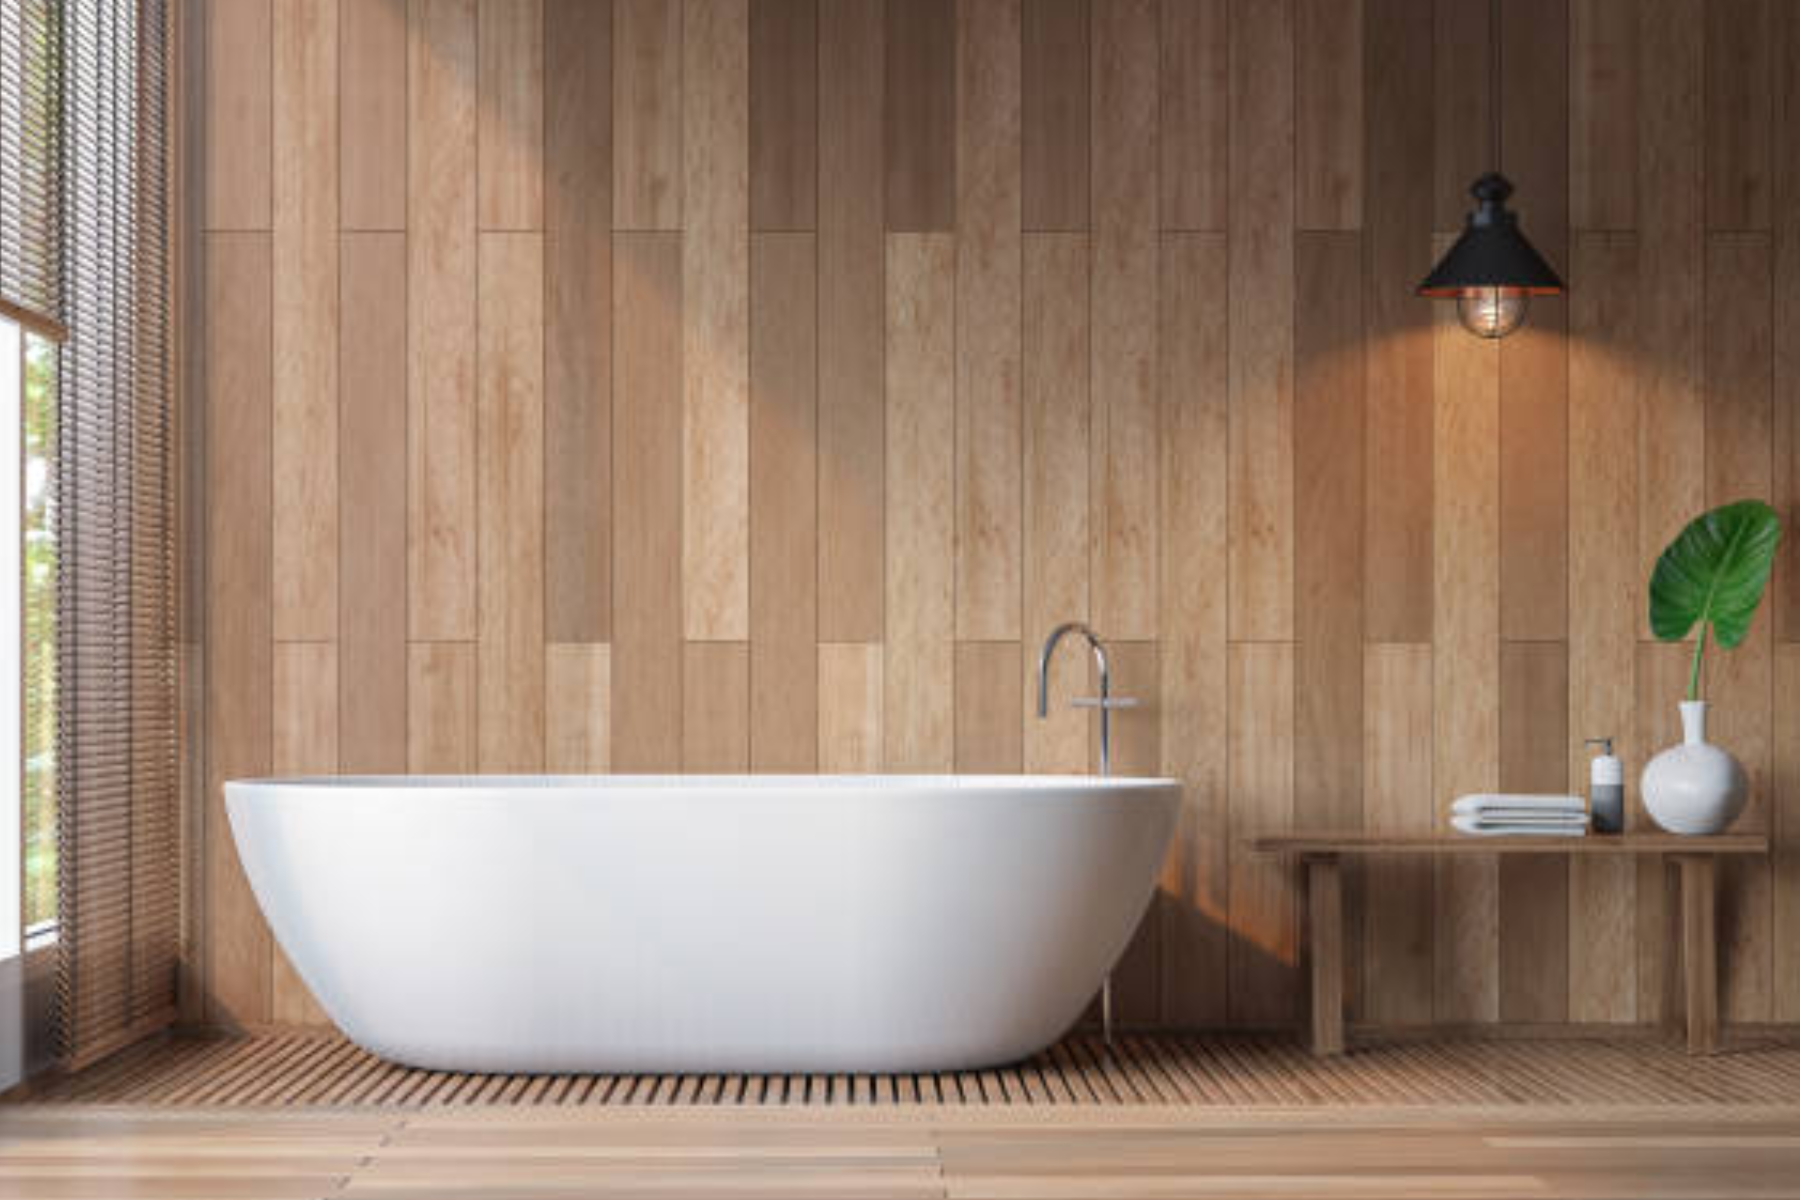 Wooden Wall And Themed Bathroom With Showpiece Bath